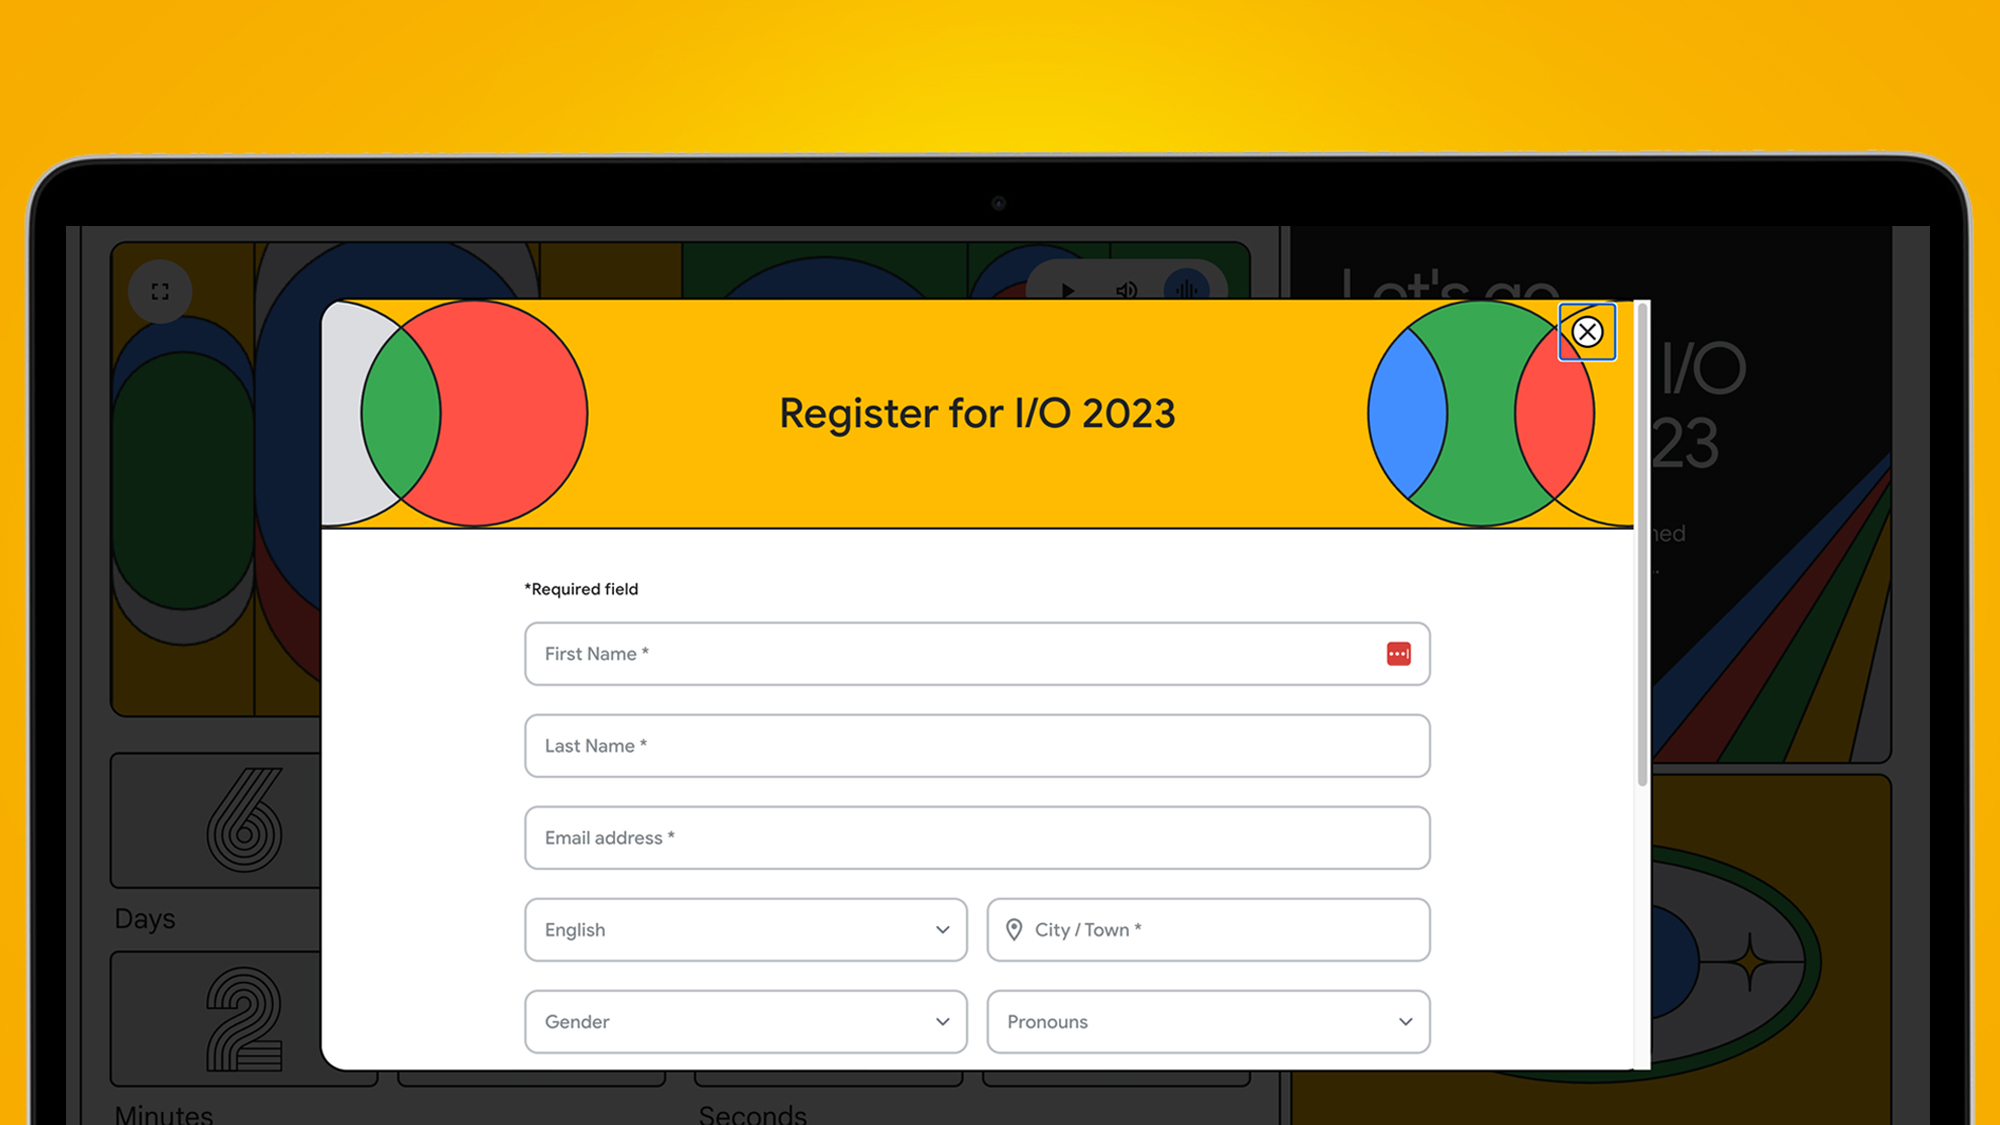 A laptop screen on an orange background showing the registration page for Google IO 2023